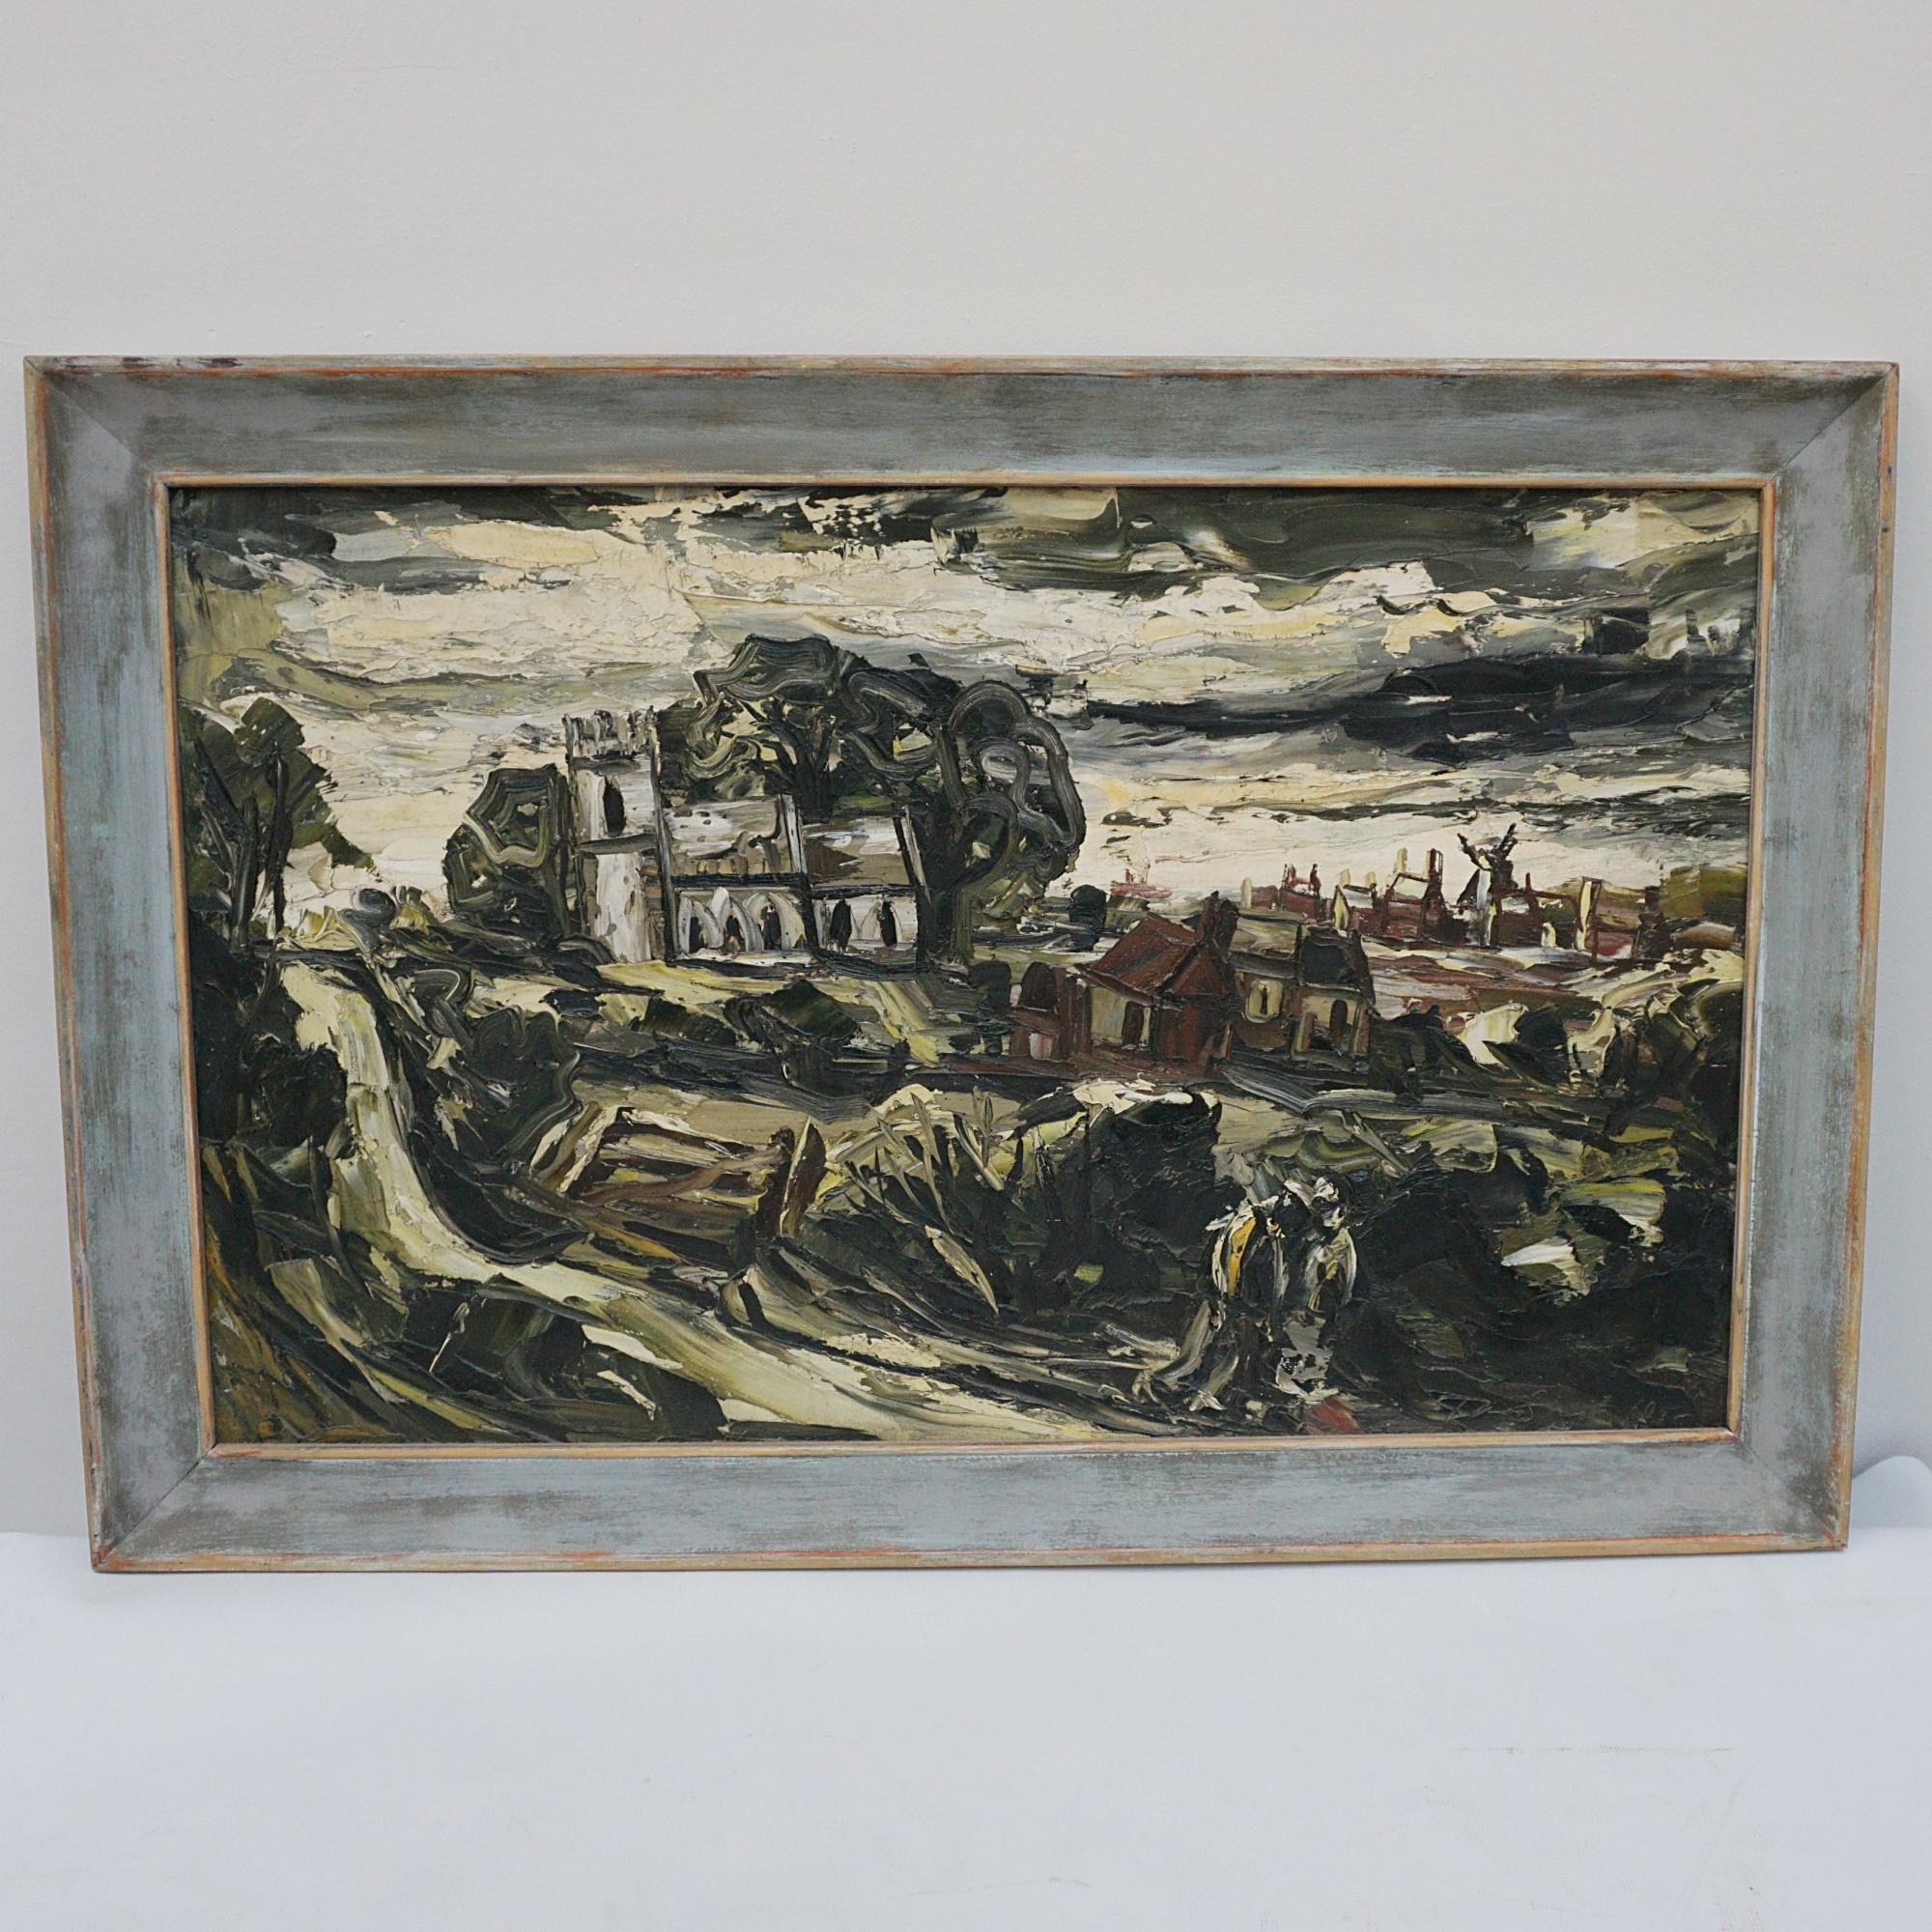 A mid-20th century oil on board painting of an English countryside village scene depicting a castle in the foreground with houses and a Windmill in the distance. Signed to lower left and dated 1936. Artist unknown.

Dimensions: Picture H 48.5cm W